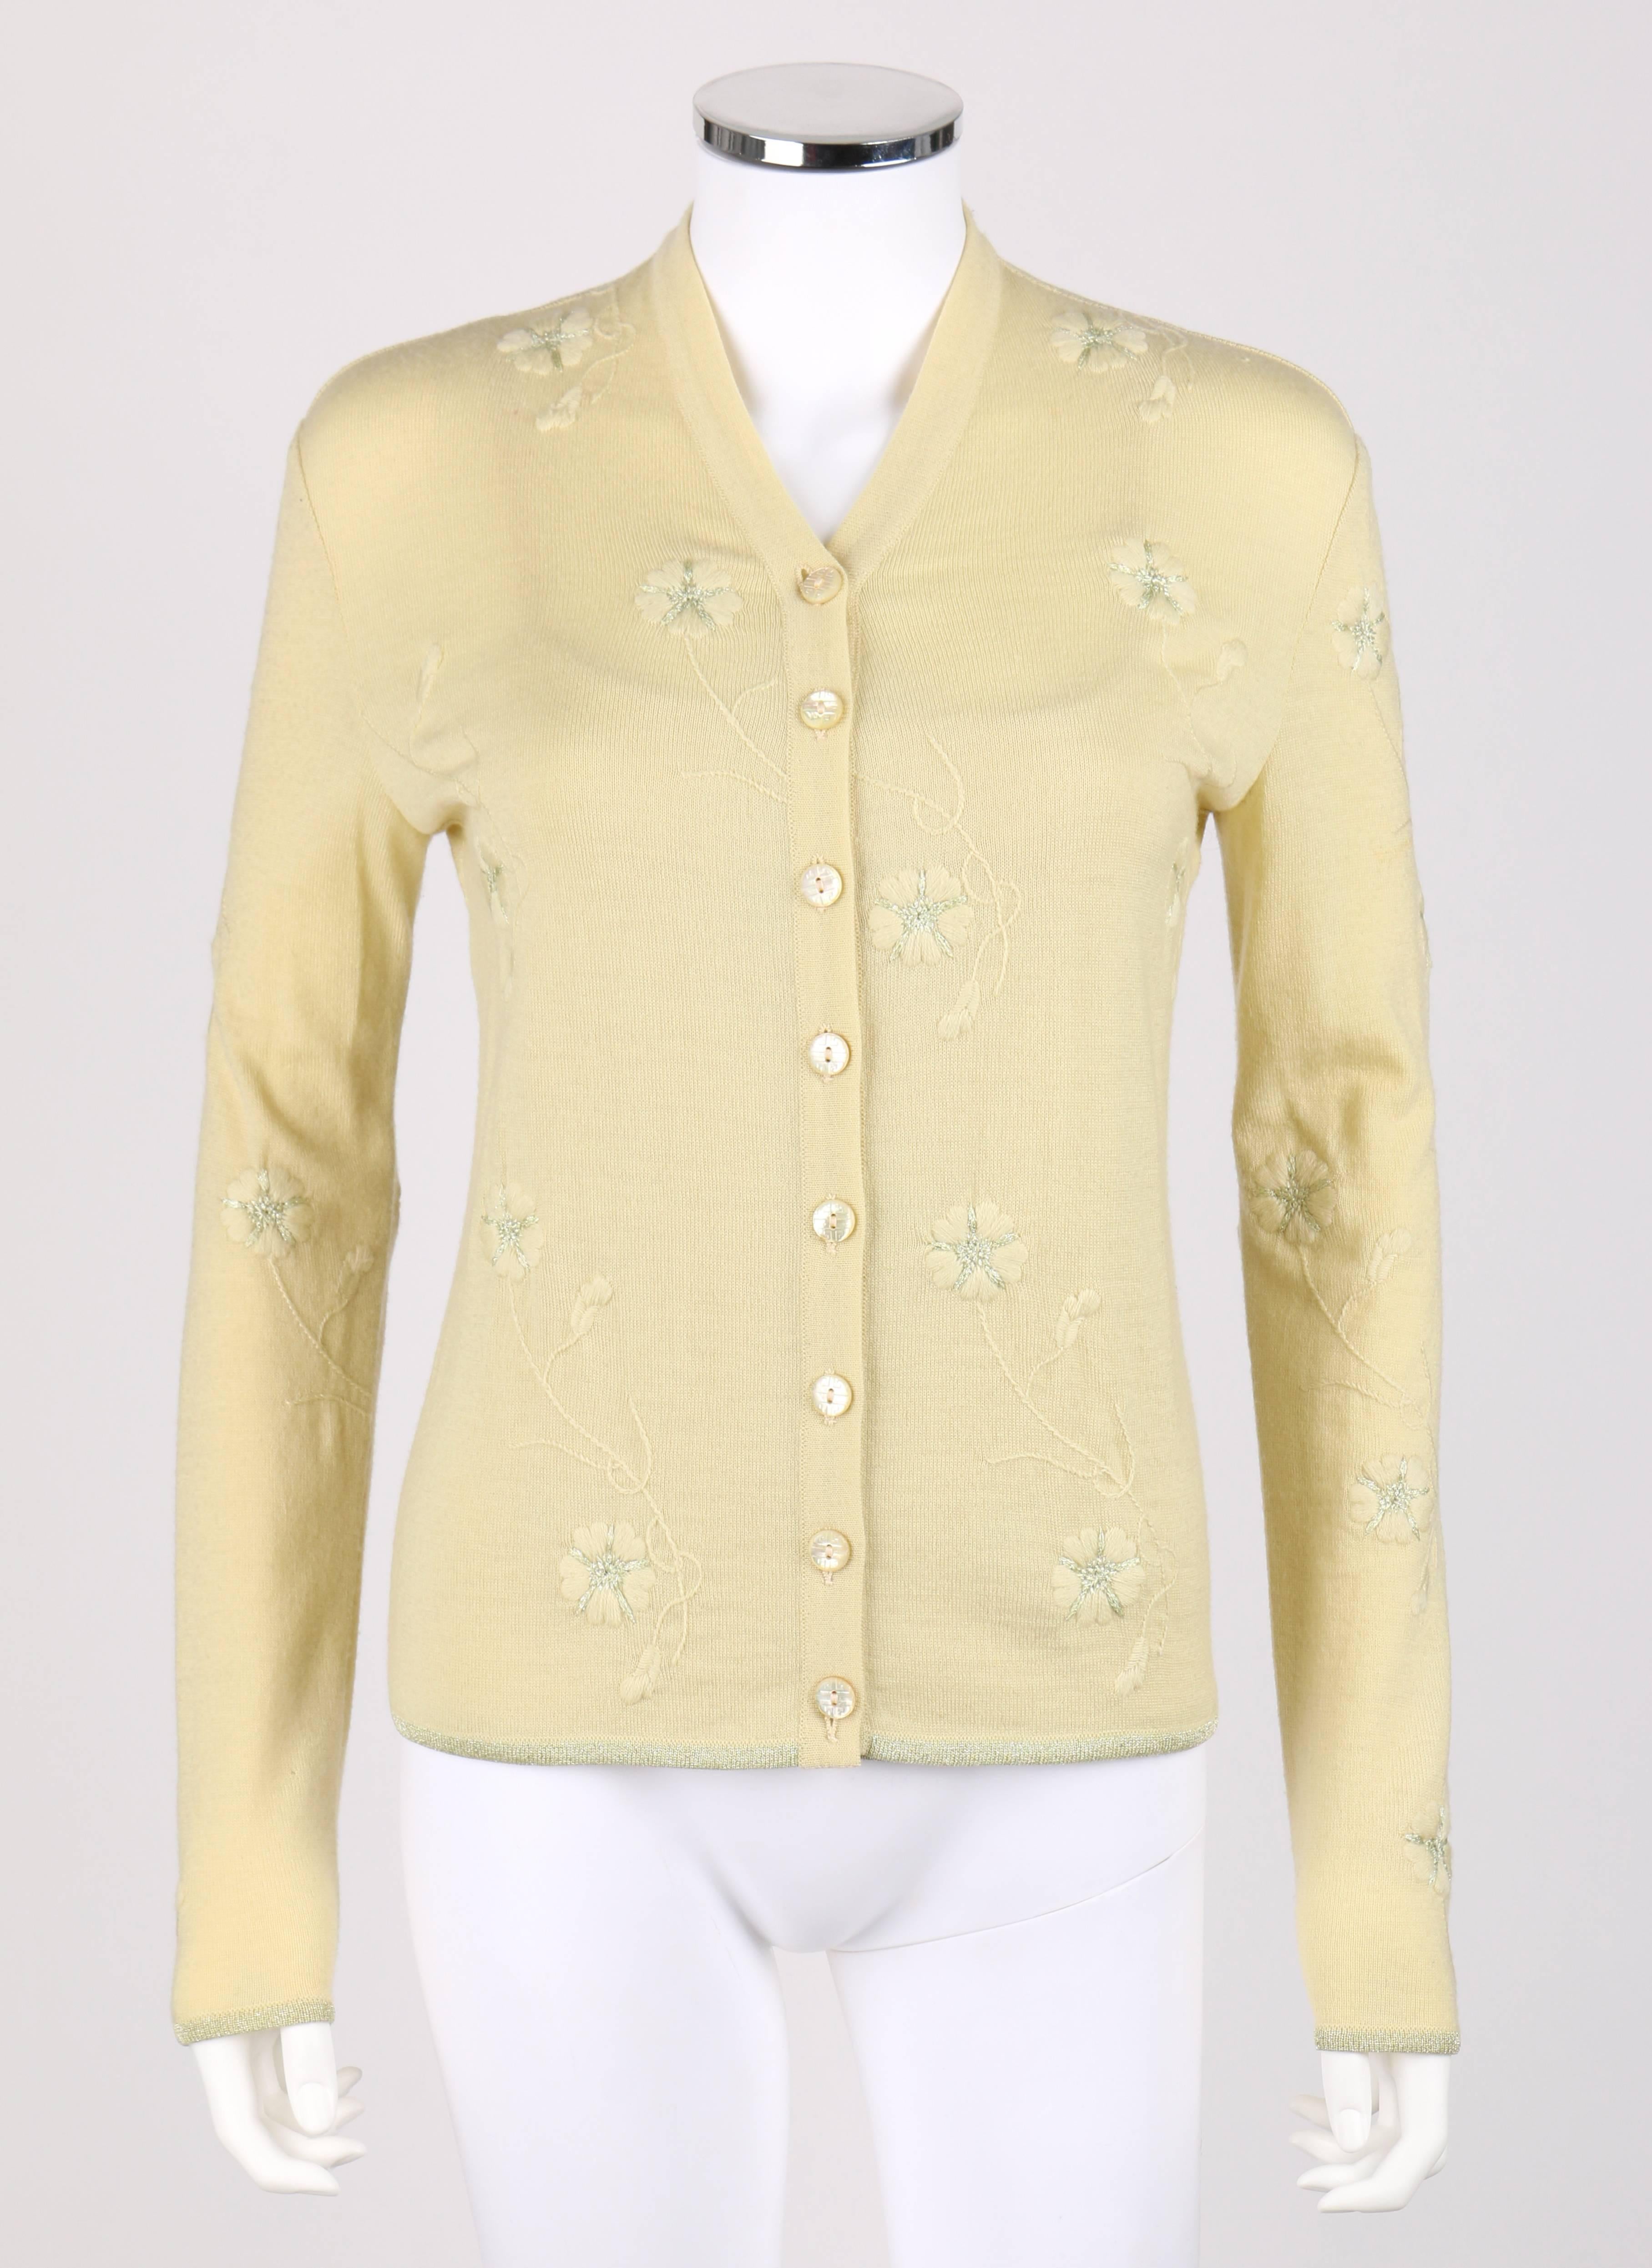 Givenchy Couture S/S 1998 designed by Alexander McQueen pale yellow cardigan tank top set. Pale yellow and metallic floral embroidered knit. Eight center front button closures. Round pearlescent yellow buttons with etched Givenchy logo. V-neckline.